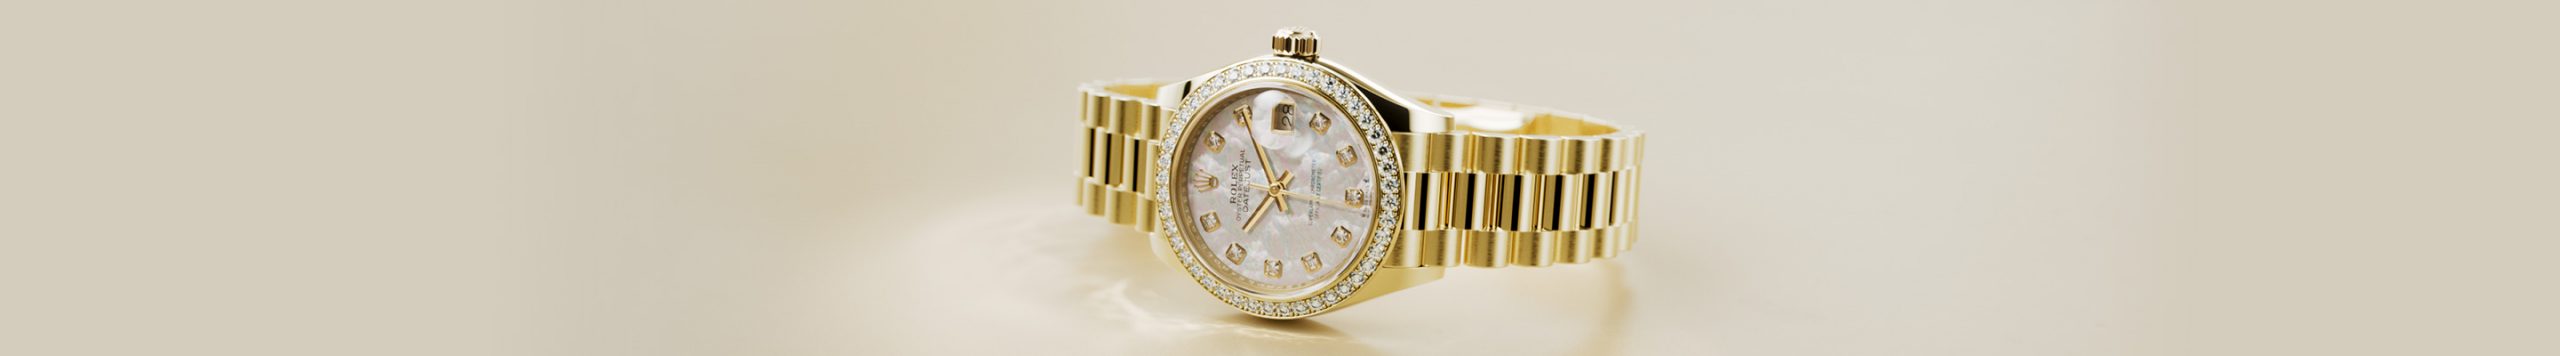 Rolex Lady-Datejust in gold